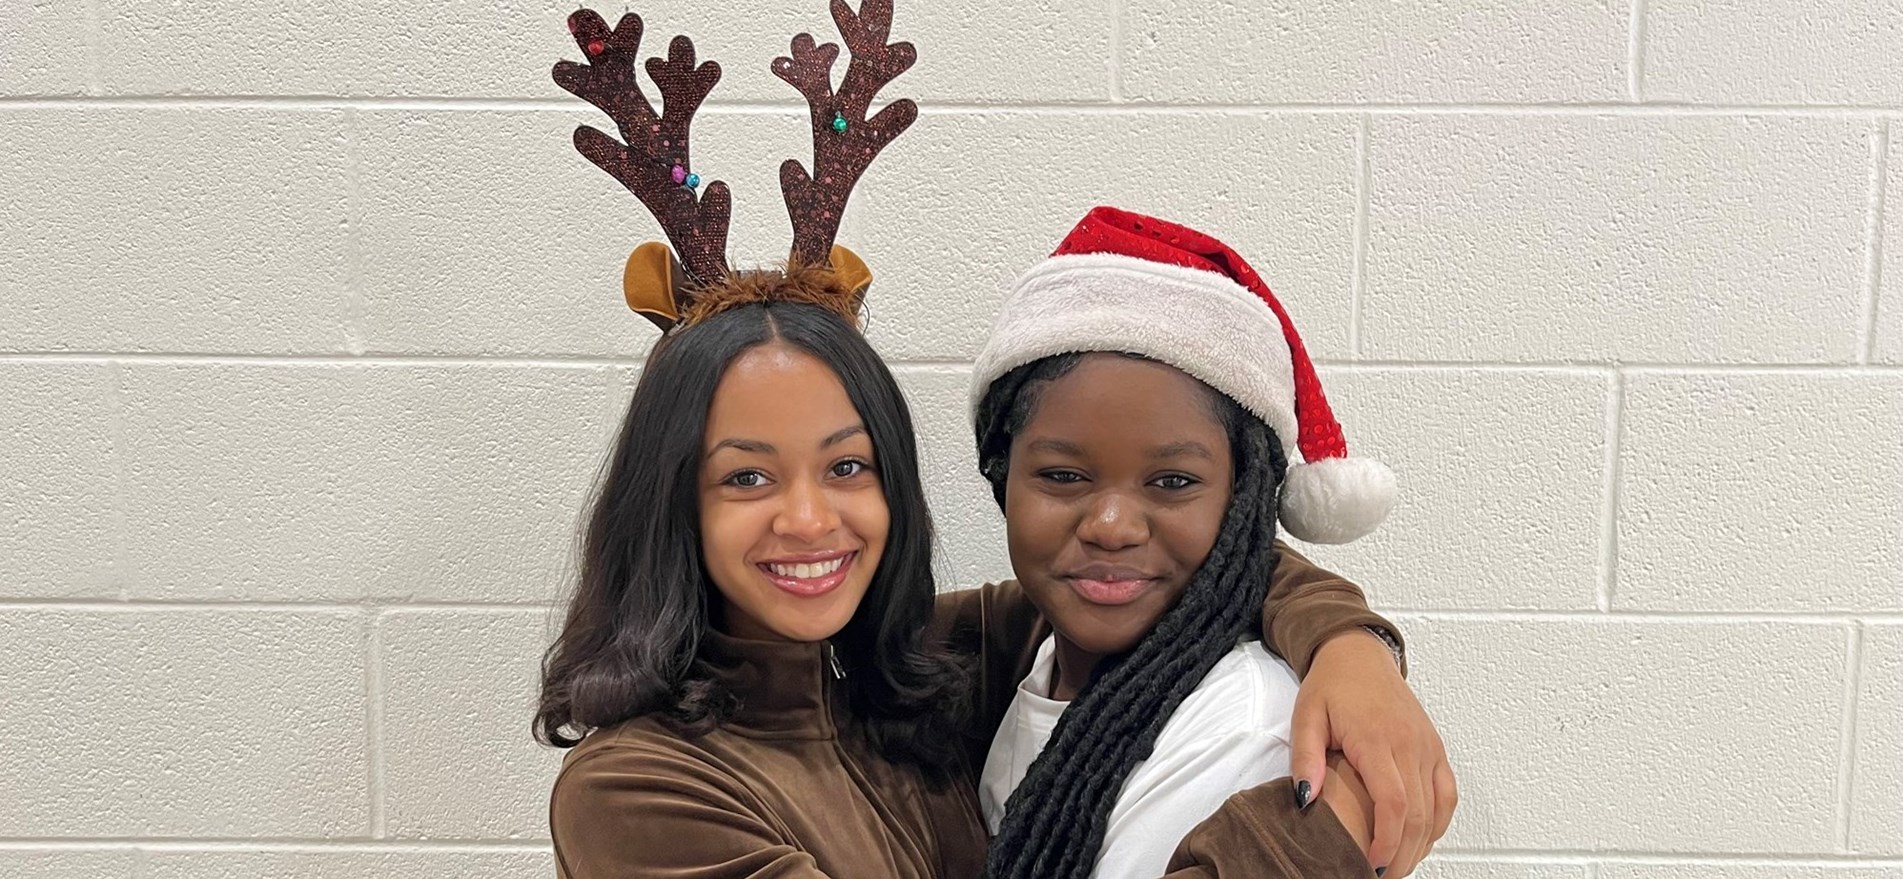 Two students pose in their costums for Iconic Duo themed dress day, one as Santa, the other as a reindeer